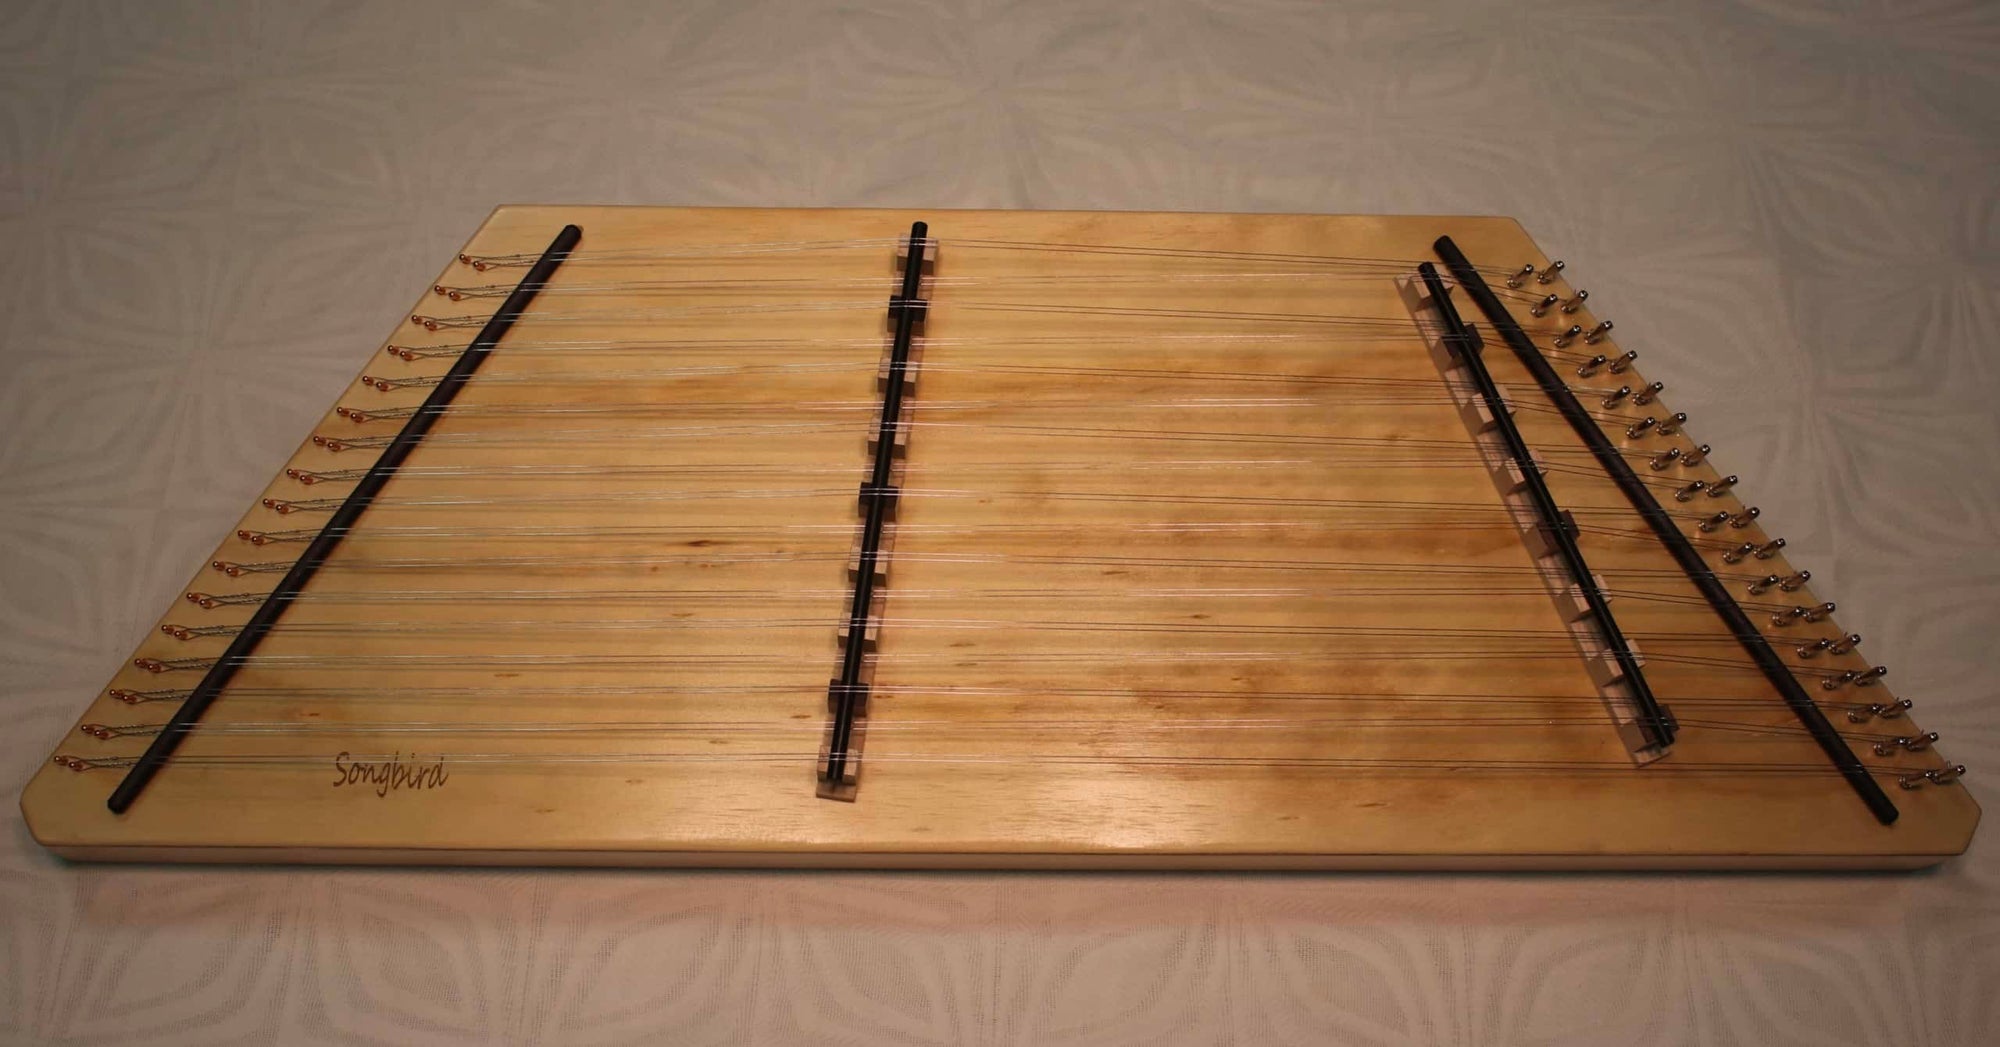 A Two String 9/8 Fledgling Songbird Hammered Dulcimer with several strings on it that requires tuning.